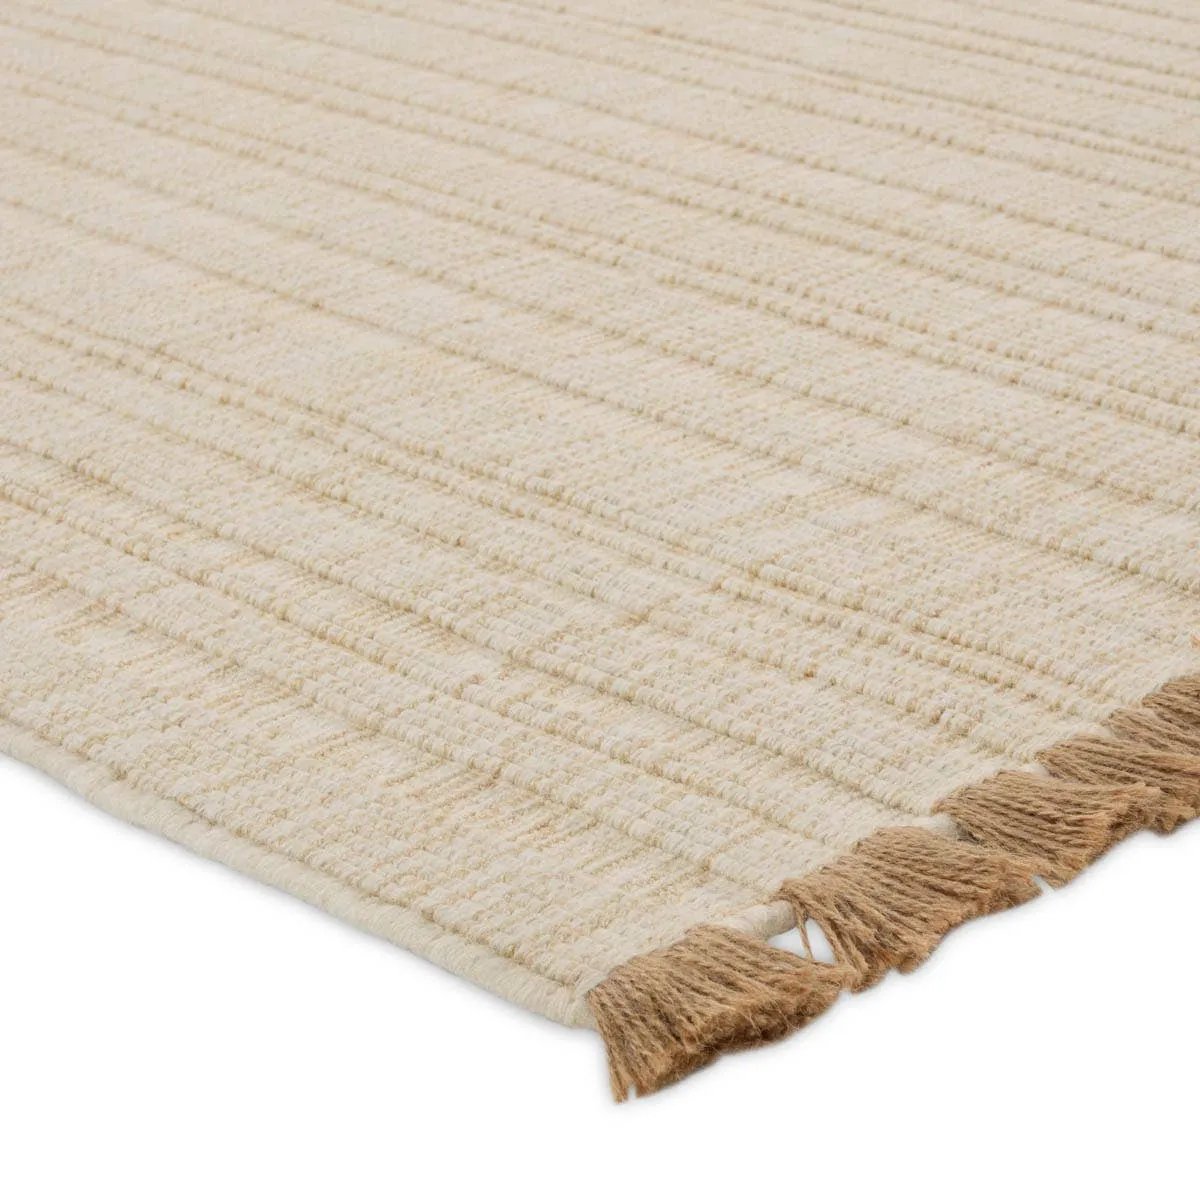 The Tienne Bandera draws inspiration from the natural world through rich texture and a wool, cotton, and jute make. Handloomed by artisans in India, these rugs exude a simple elegance suited for any modern home. The Bandera design?s cream and beige colorway provides a neutral, grounding effect in contemporary spaces. Amethyst Home provides interior design, new home construction design consulting, vintage area rugs, and lighting in the San Diego metro area.